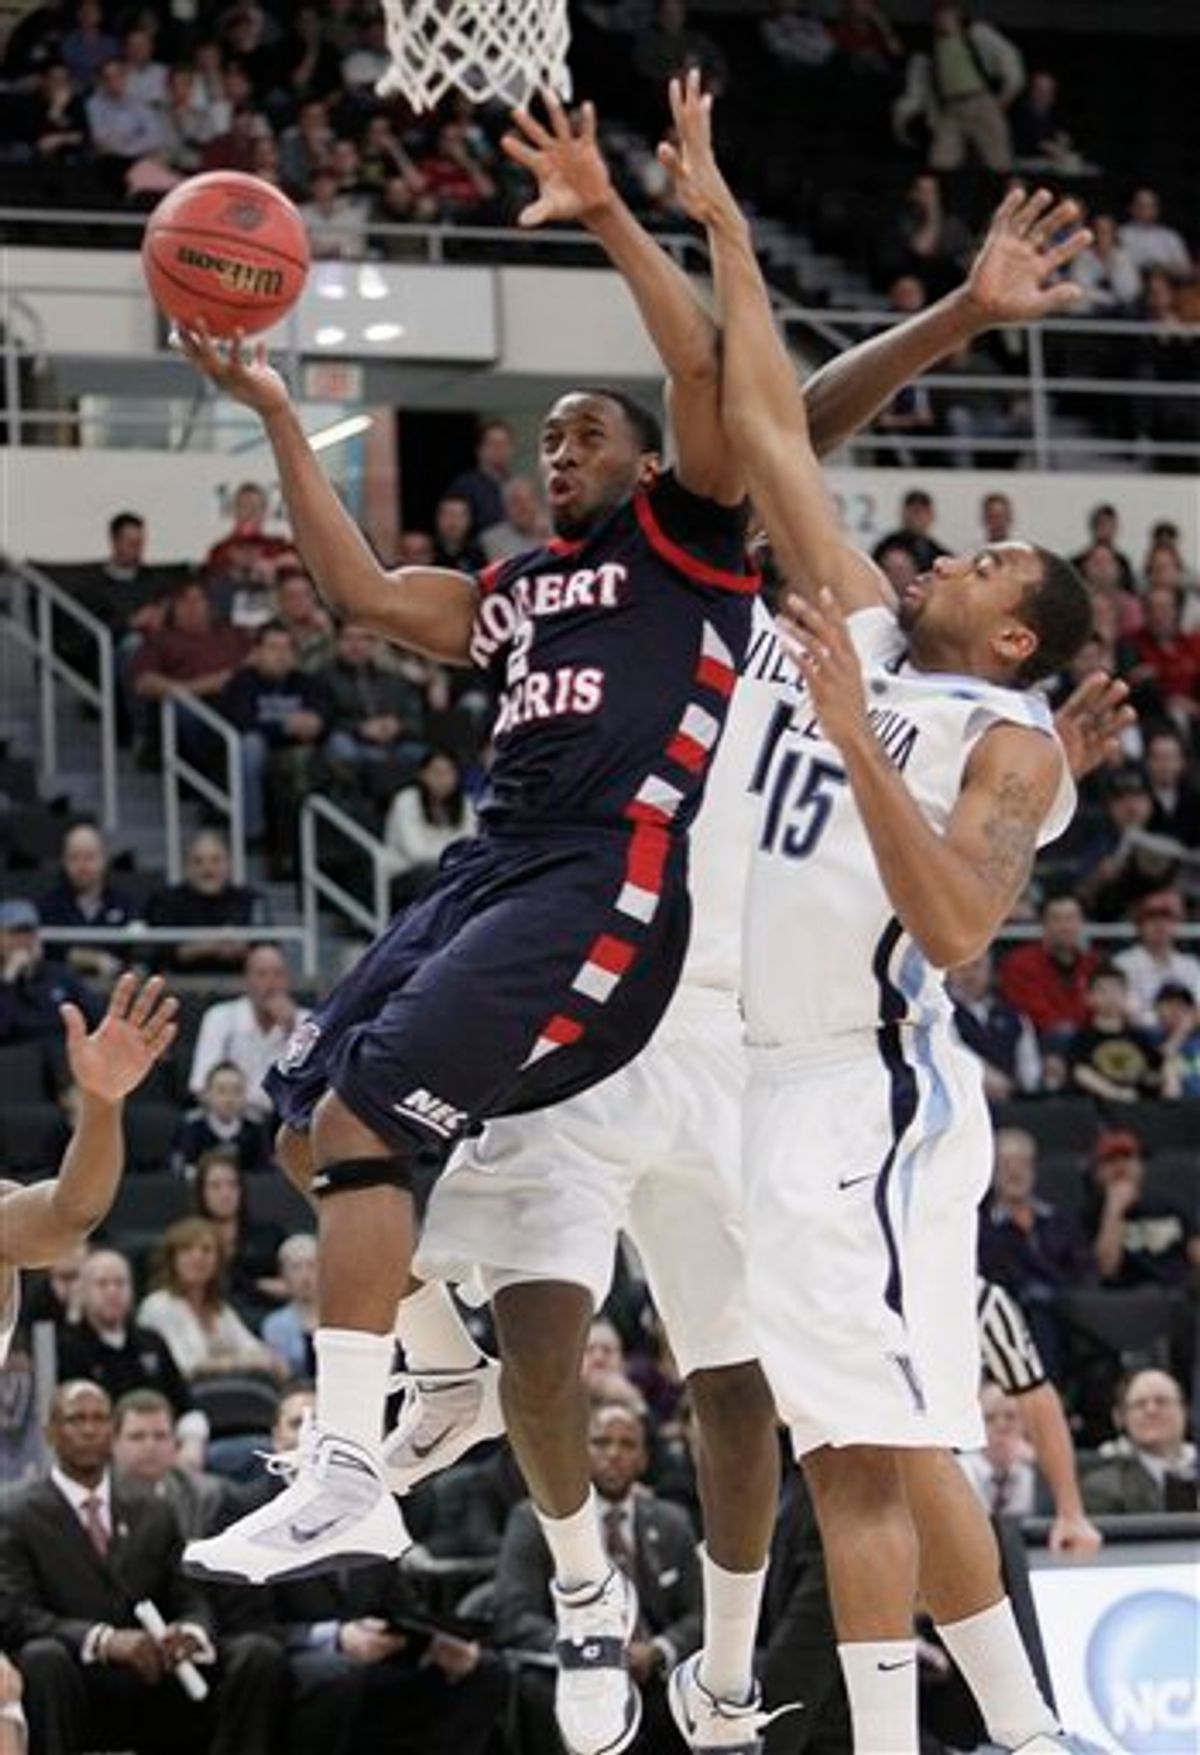 Robert Morris' Mezie Nwigwe (2) drives past Villanova's Reggie Redding (15) during the first half of an NCAA first-round college basketball game in Providence, R.I., Thursday, March 18, 2010. (AP Photo/Winslow Townson)  (AP)